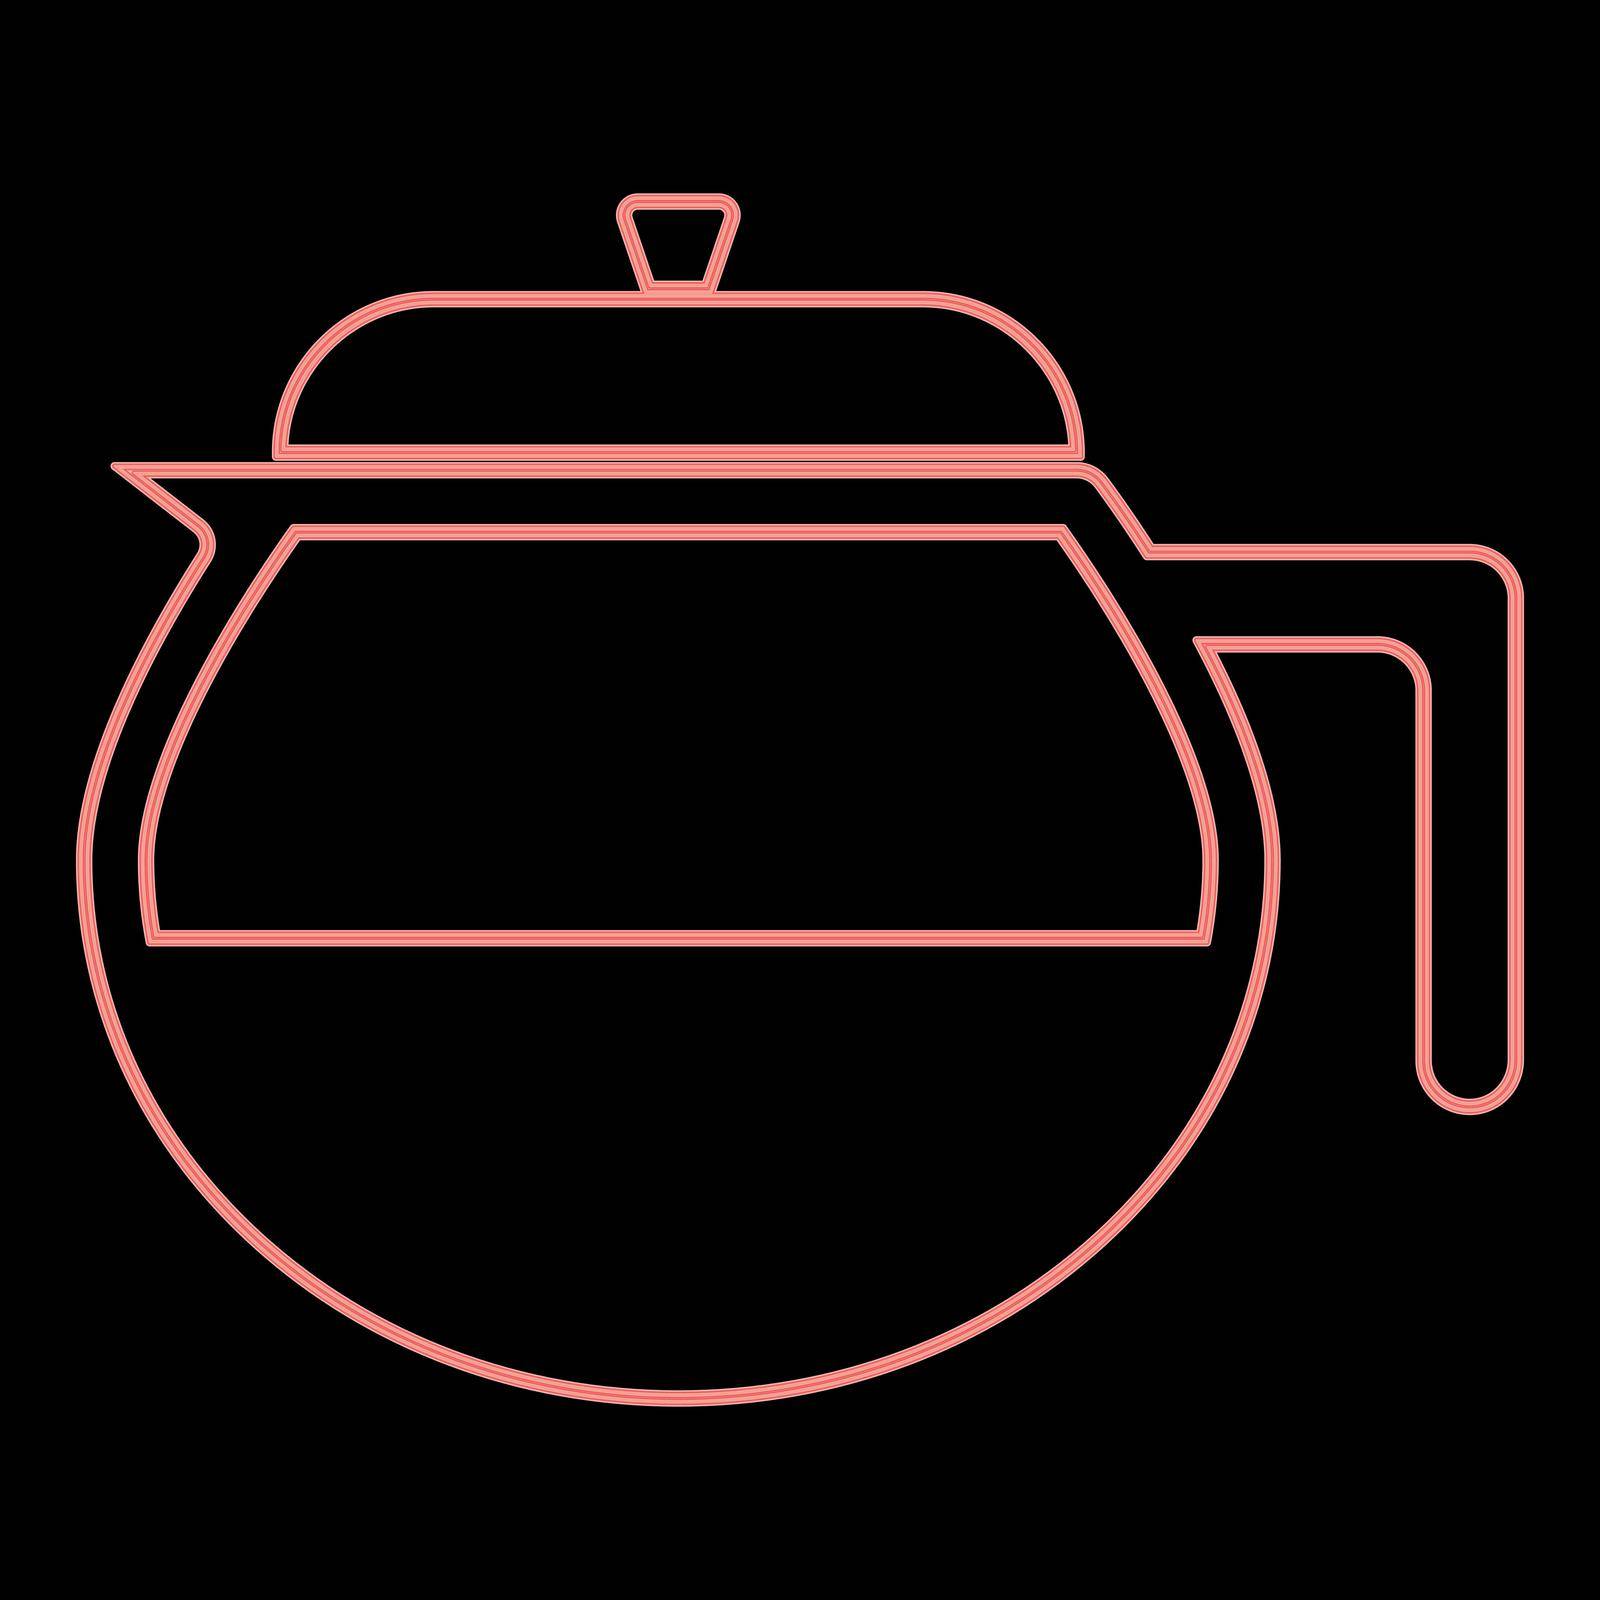 Neon teapot it is the red color vector illustration flat style light image